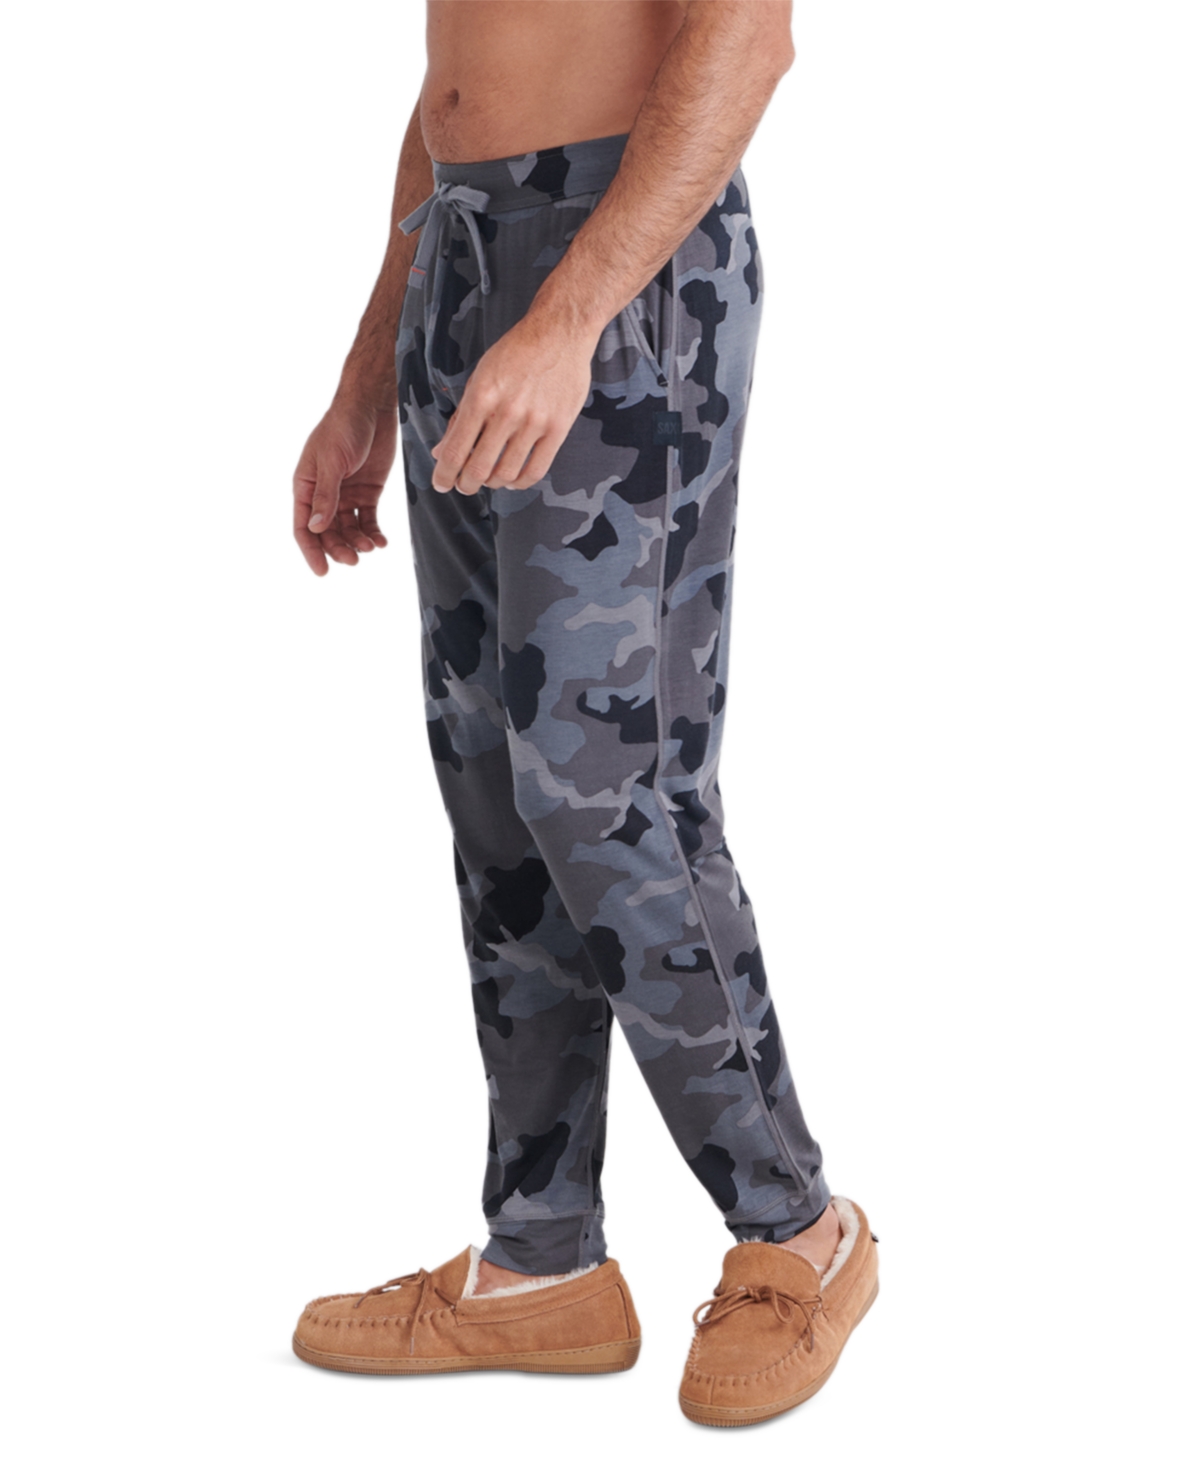 Saxx Men's Snooze Relaxed-fit Camouflage Sleep Pants In Supersize Camo- Dk Chrcl